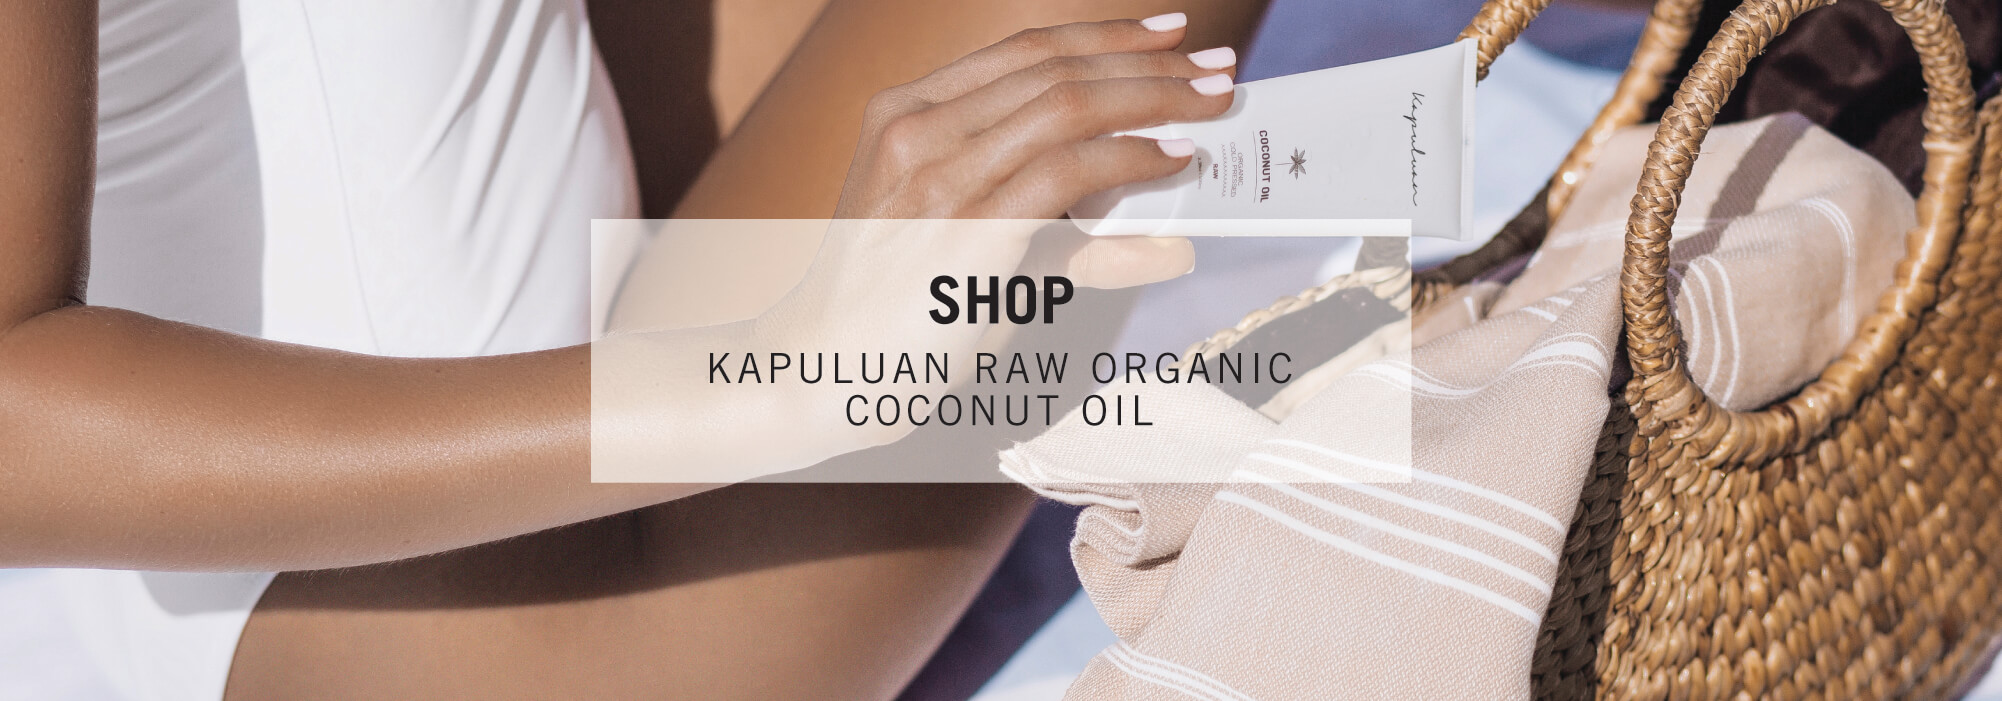 Embrace natural skincare with kapuluan raw coconut coconut oil - pure nourishment for your skin.